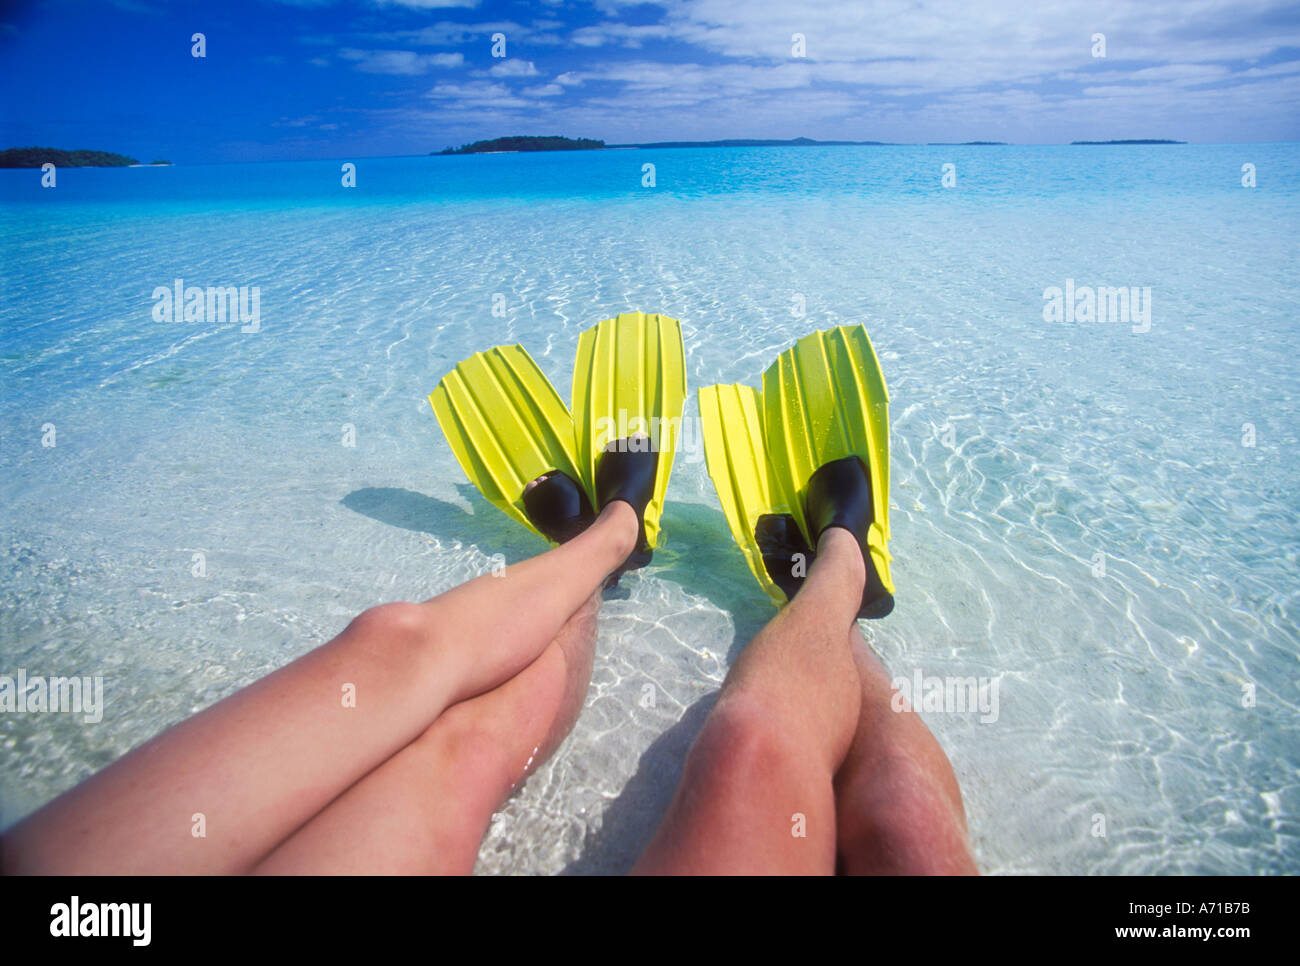 Two pair of legs with yellow swim fins on feet Aitutaki Lagoon Cook Islands South Pacific Ocean model released image Stock Photo